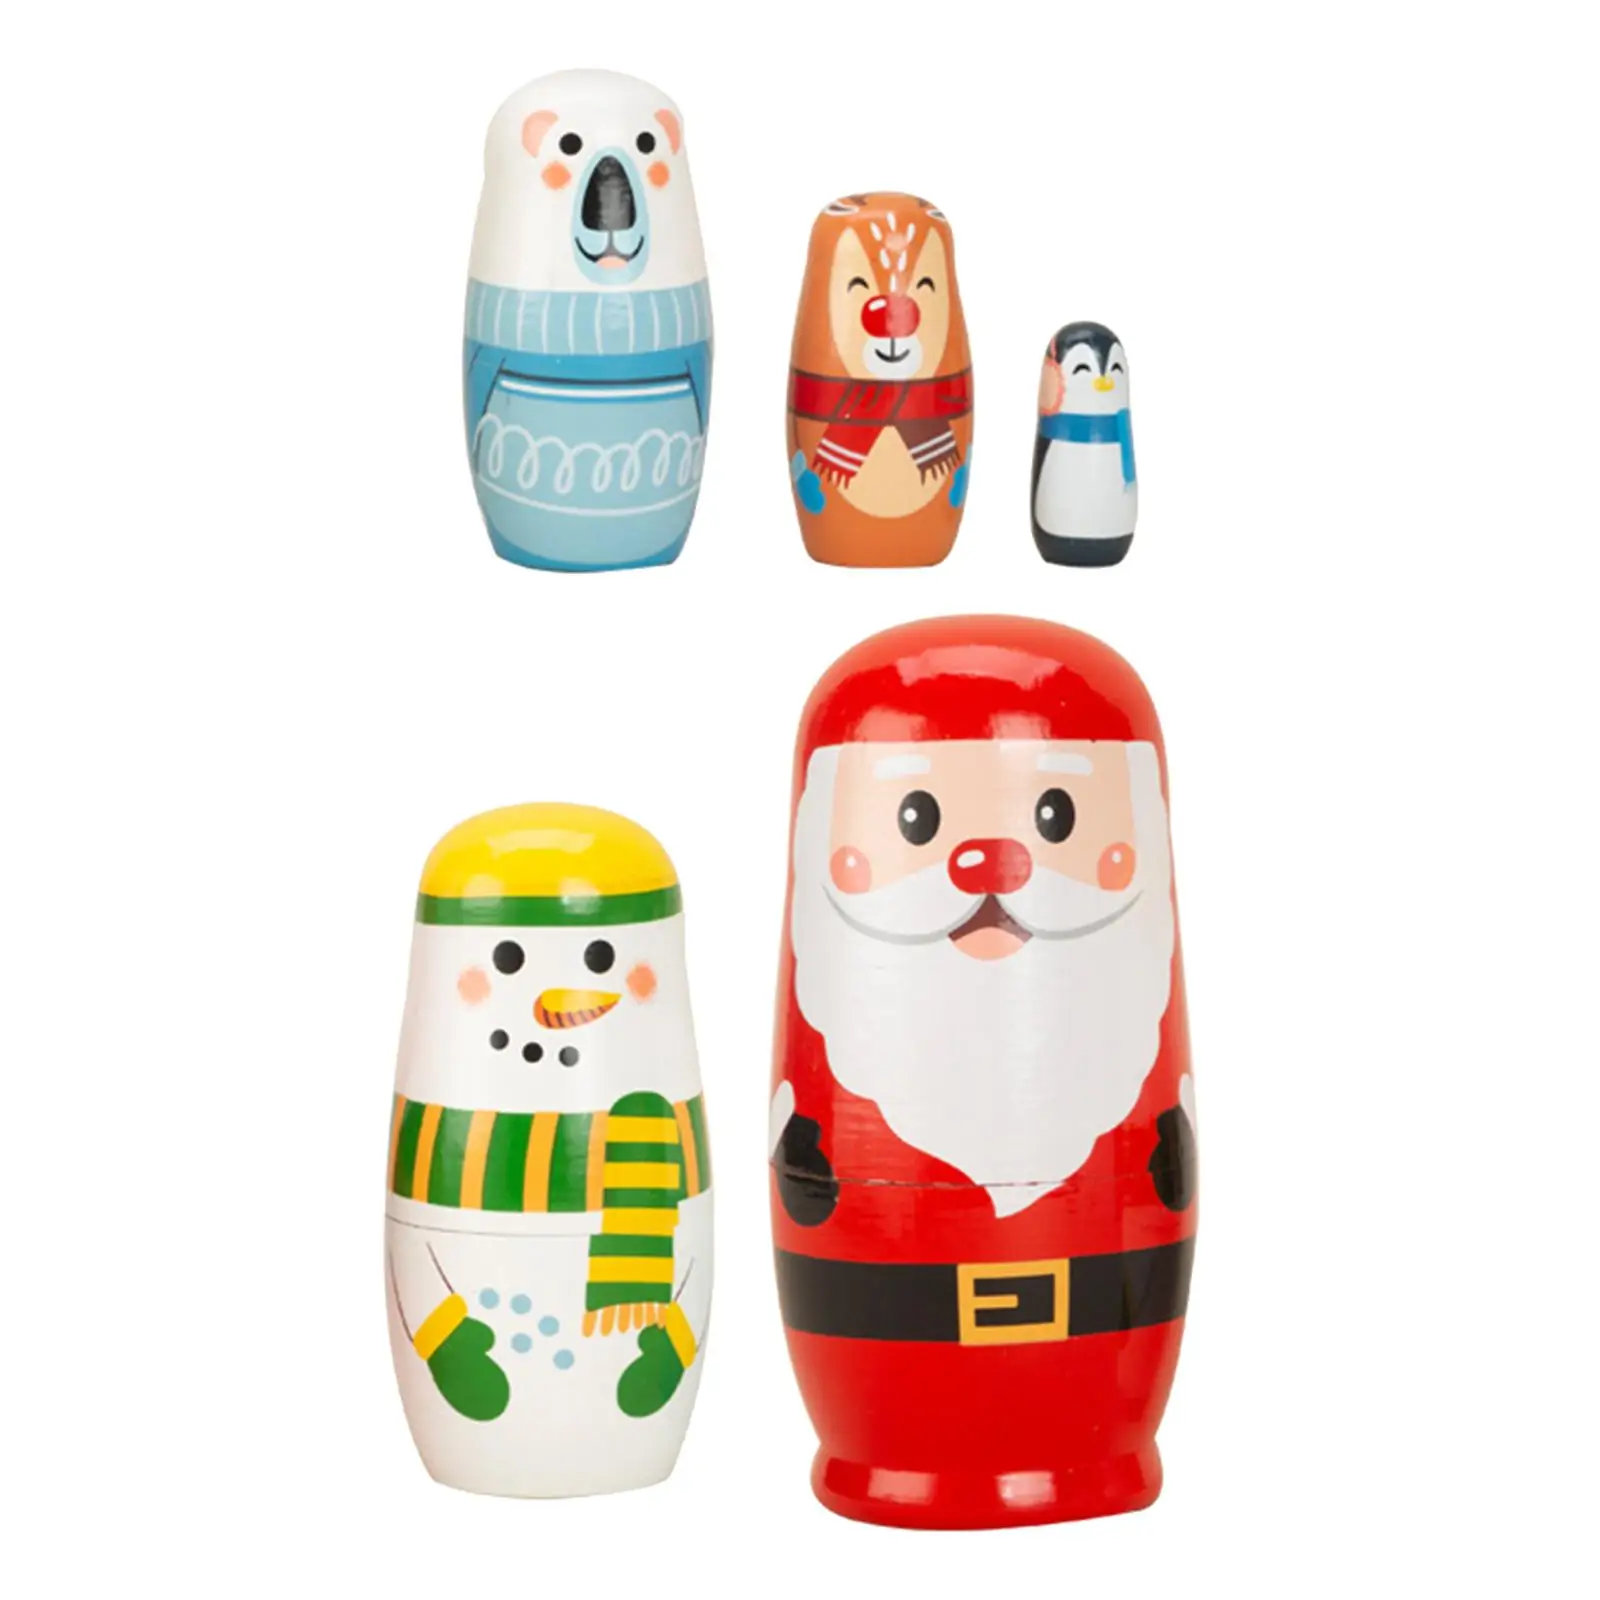 5Pcs Novelty Nesting Dolls Toy Crafted Doll Collectibles Matryoshka for Gift